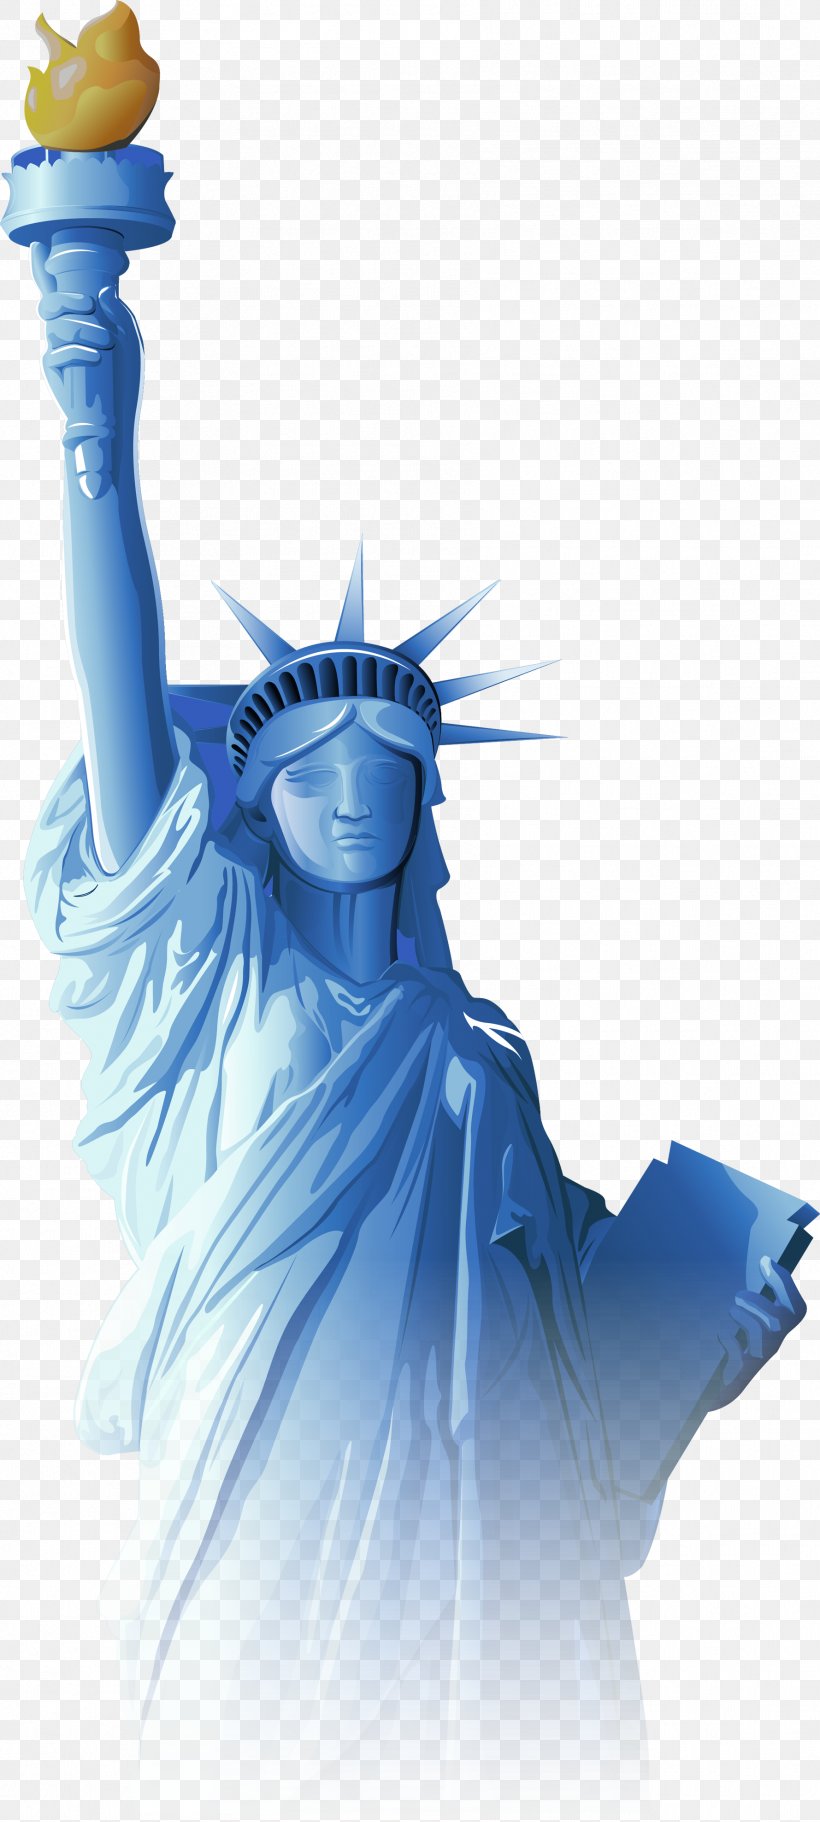 Statue Of Liberty Clip Art, PNG, 1779x3954px, Statue Of Liberty, Art, Blue, Electric Blue, Fictional Character Download Free